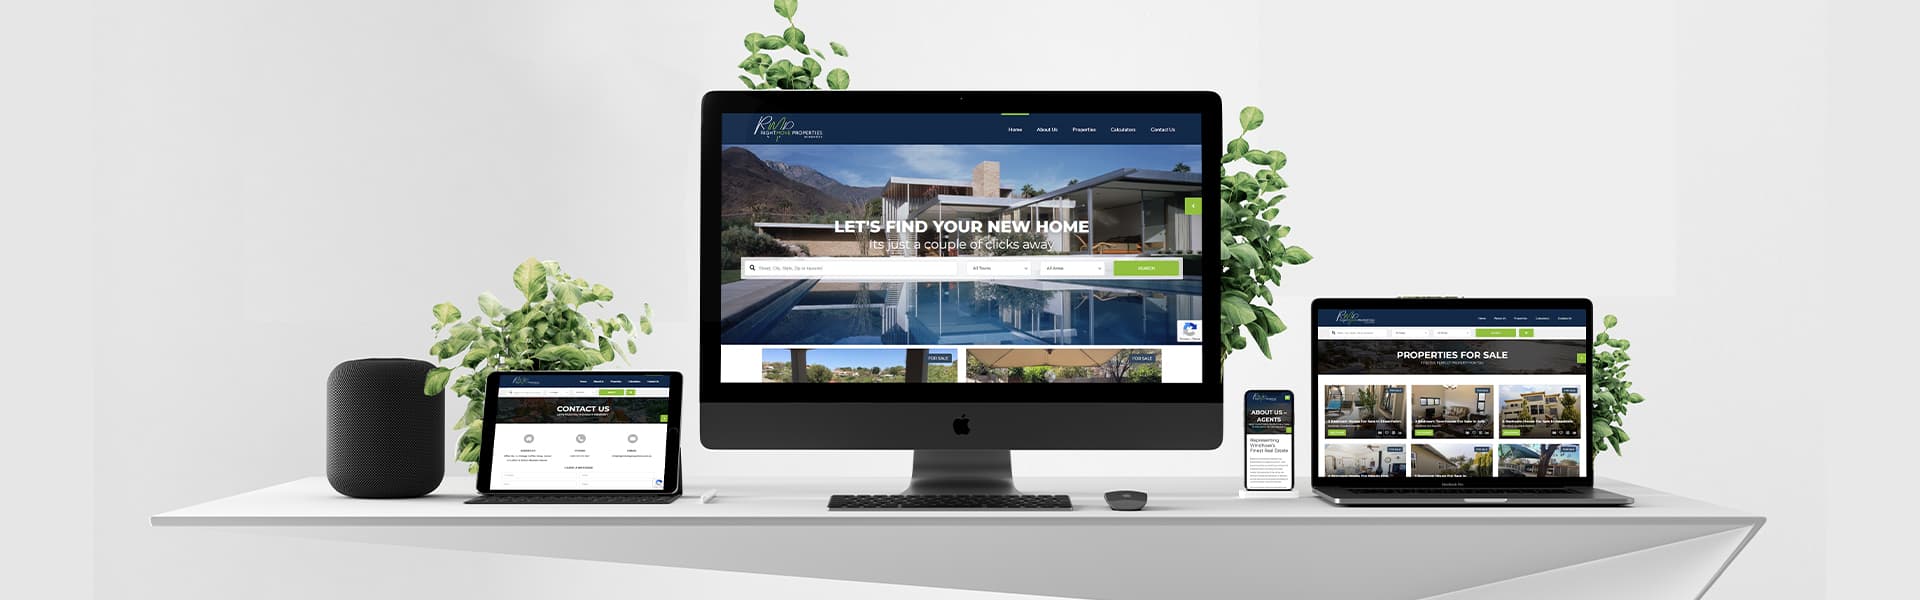 Born Intelligence, Website, Website Redesign, Website Design, Website Development, Website redesign before and after, website revamp, website redesign strategy, property listing website, property website, Rightmove Properties Namibia,